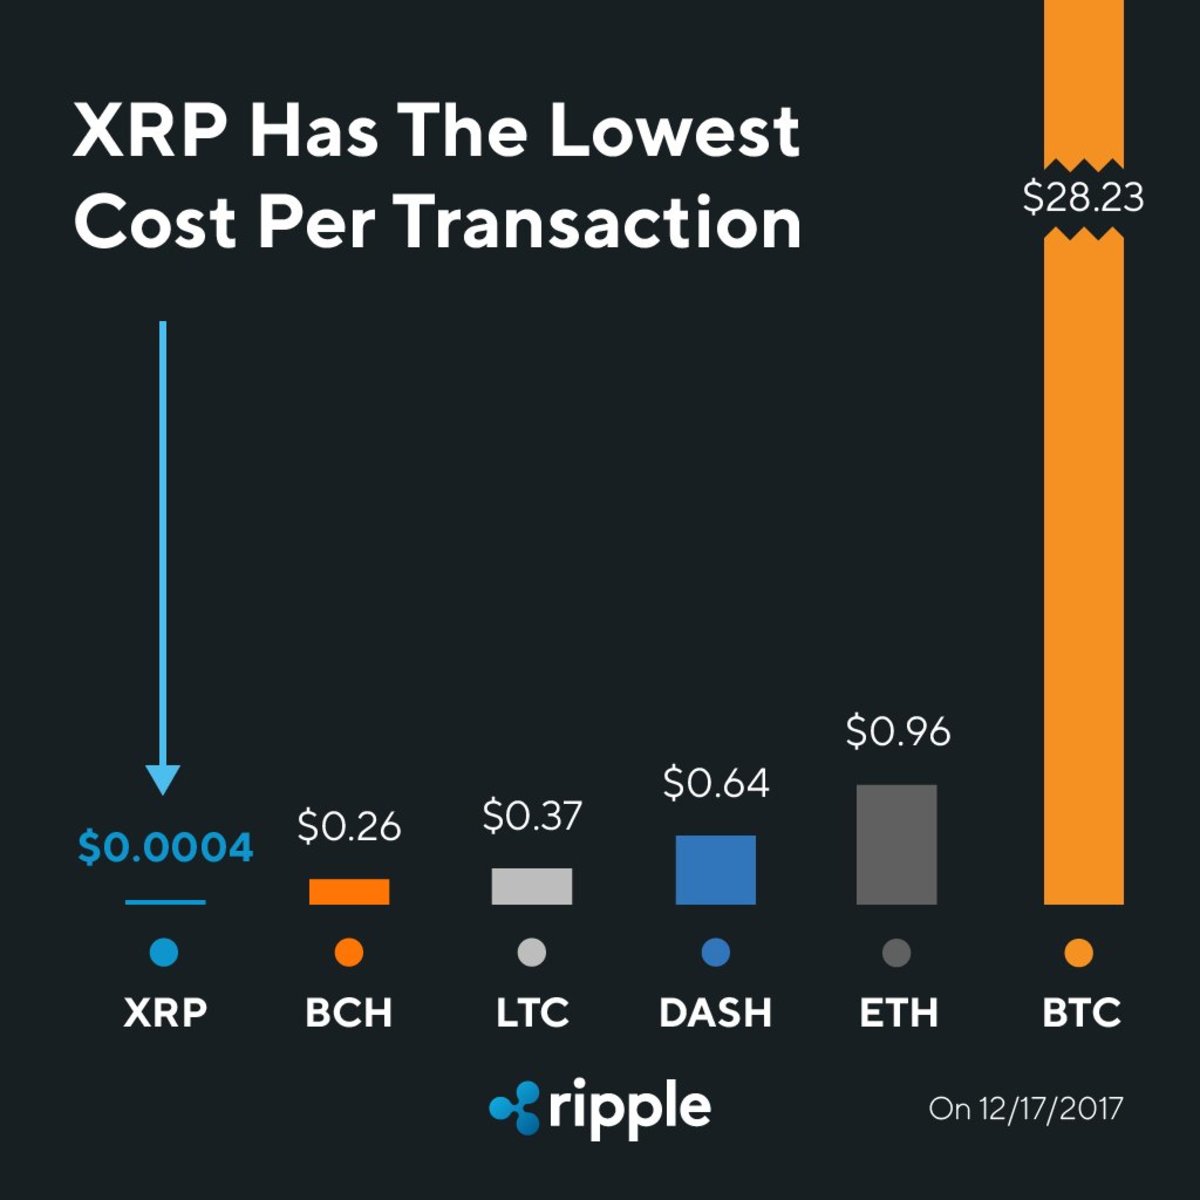 As shown above, XRP transactions are significantly cheaper than major cryptocurrency competitors.  This gives XRP a big advantage in the race to become the dominant cryptocurrency for financial transactions.